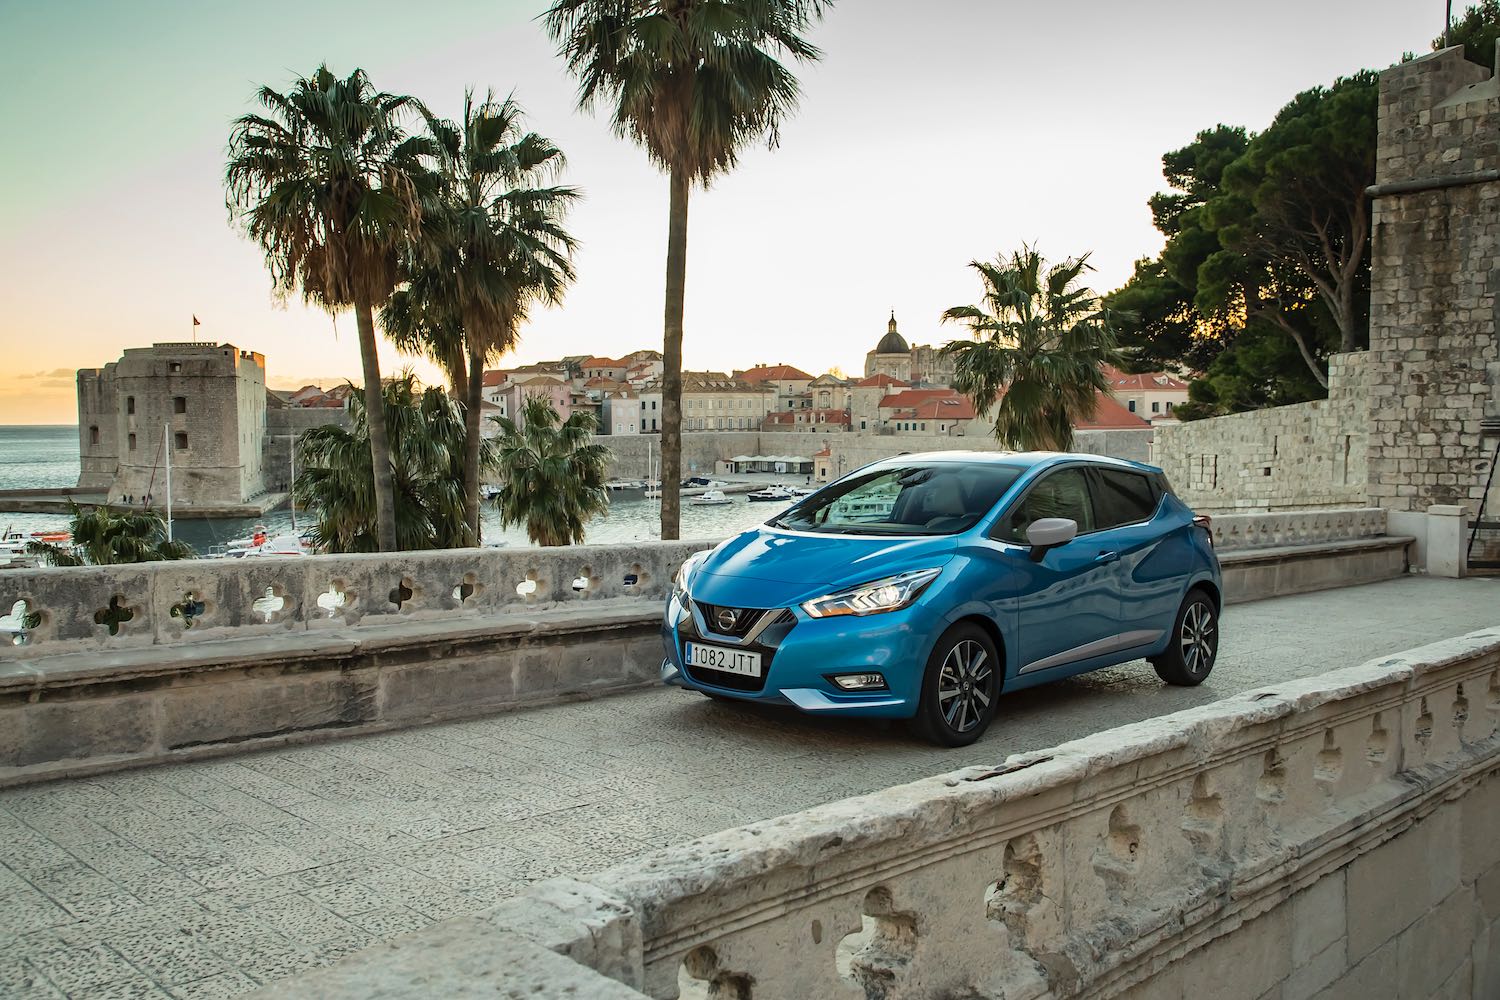 Jonathan Humphrey reviews the All-new nissan Micra 2107 for drive 11